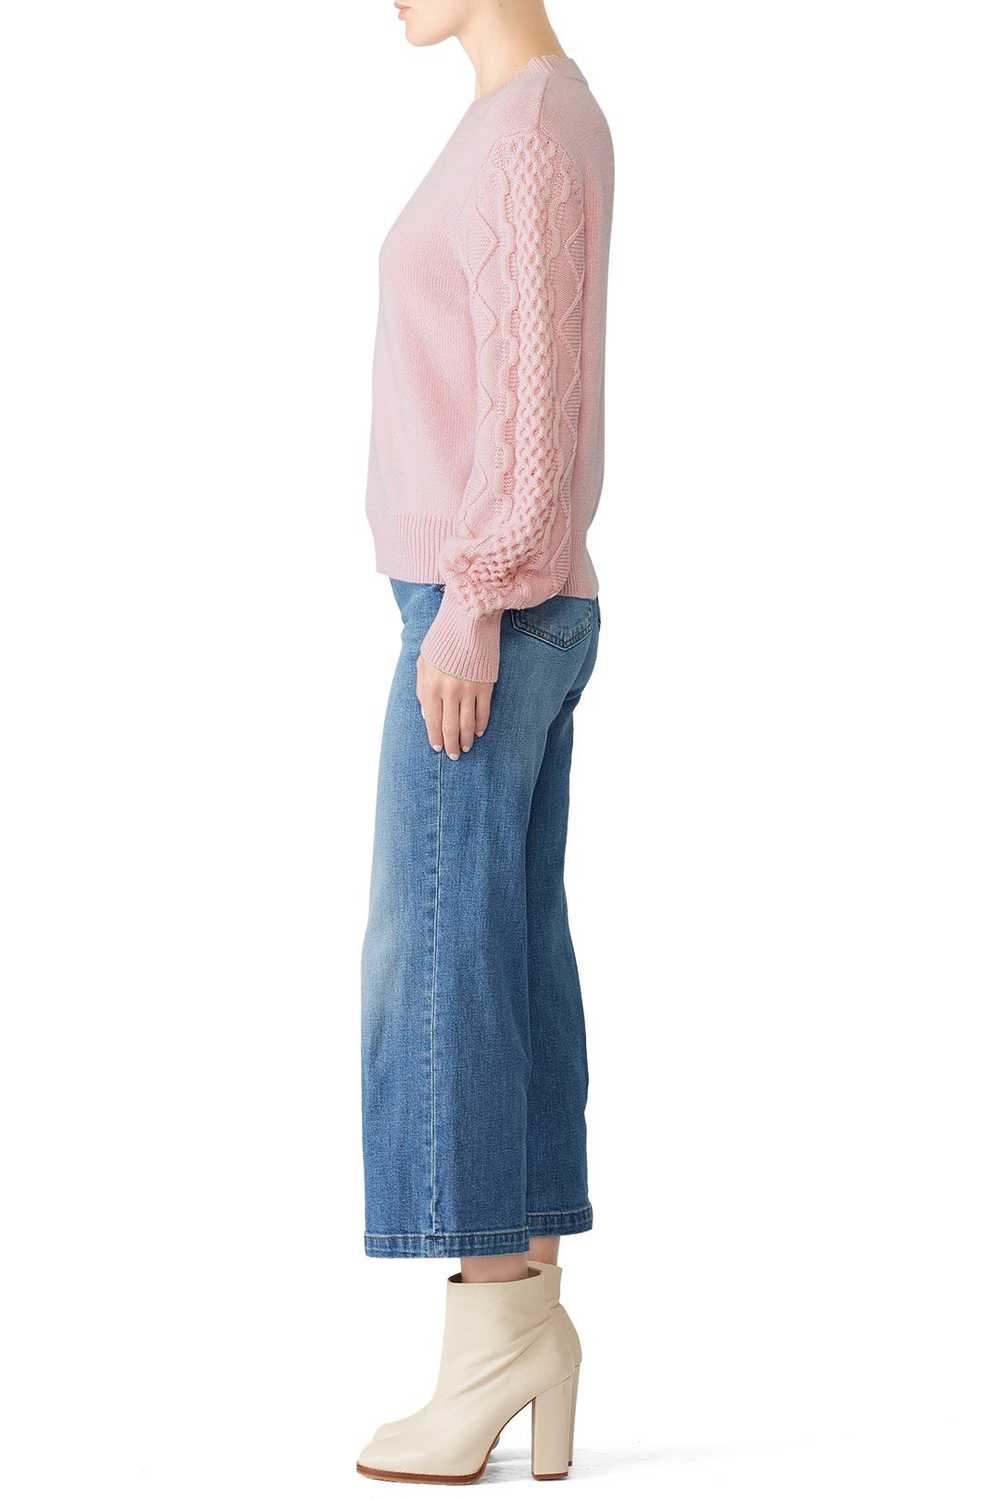 Rebecca Minkoff Pink Penny Cable Sweater - image 3